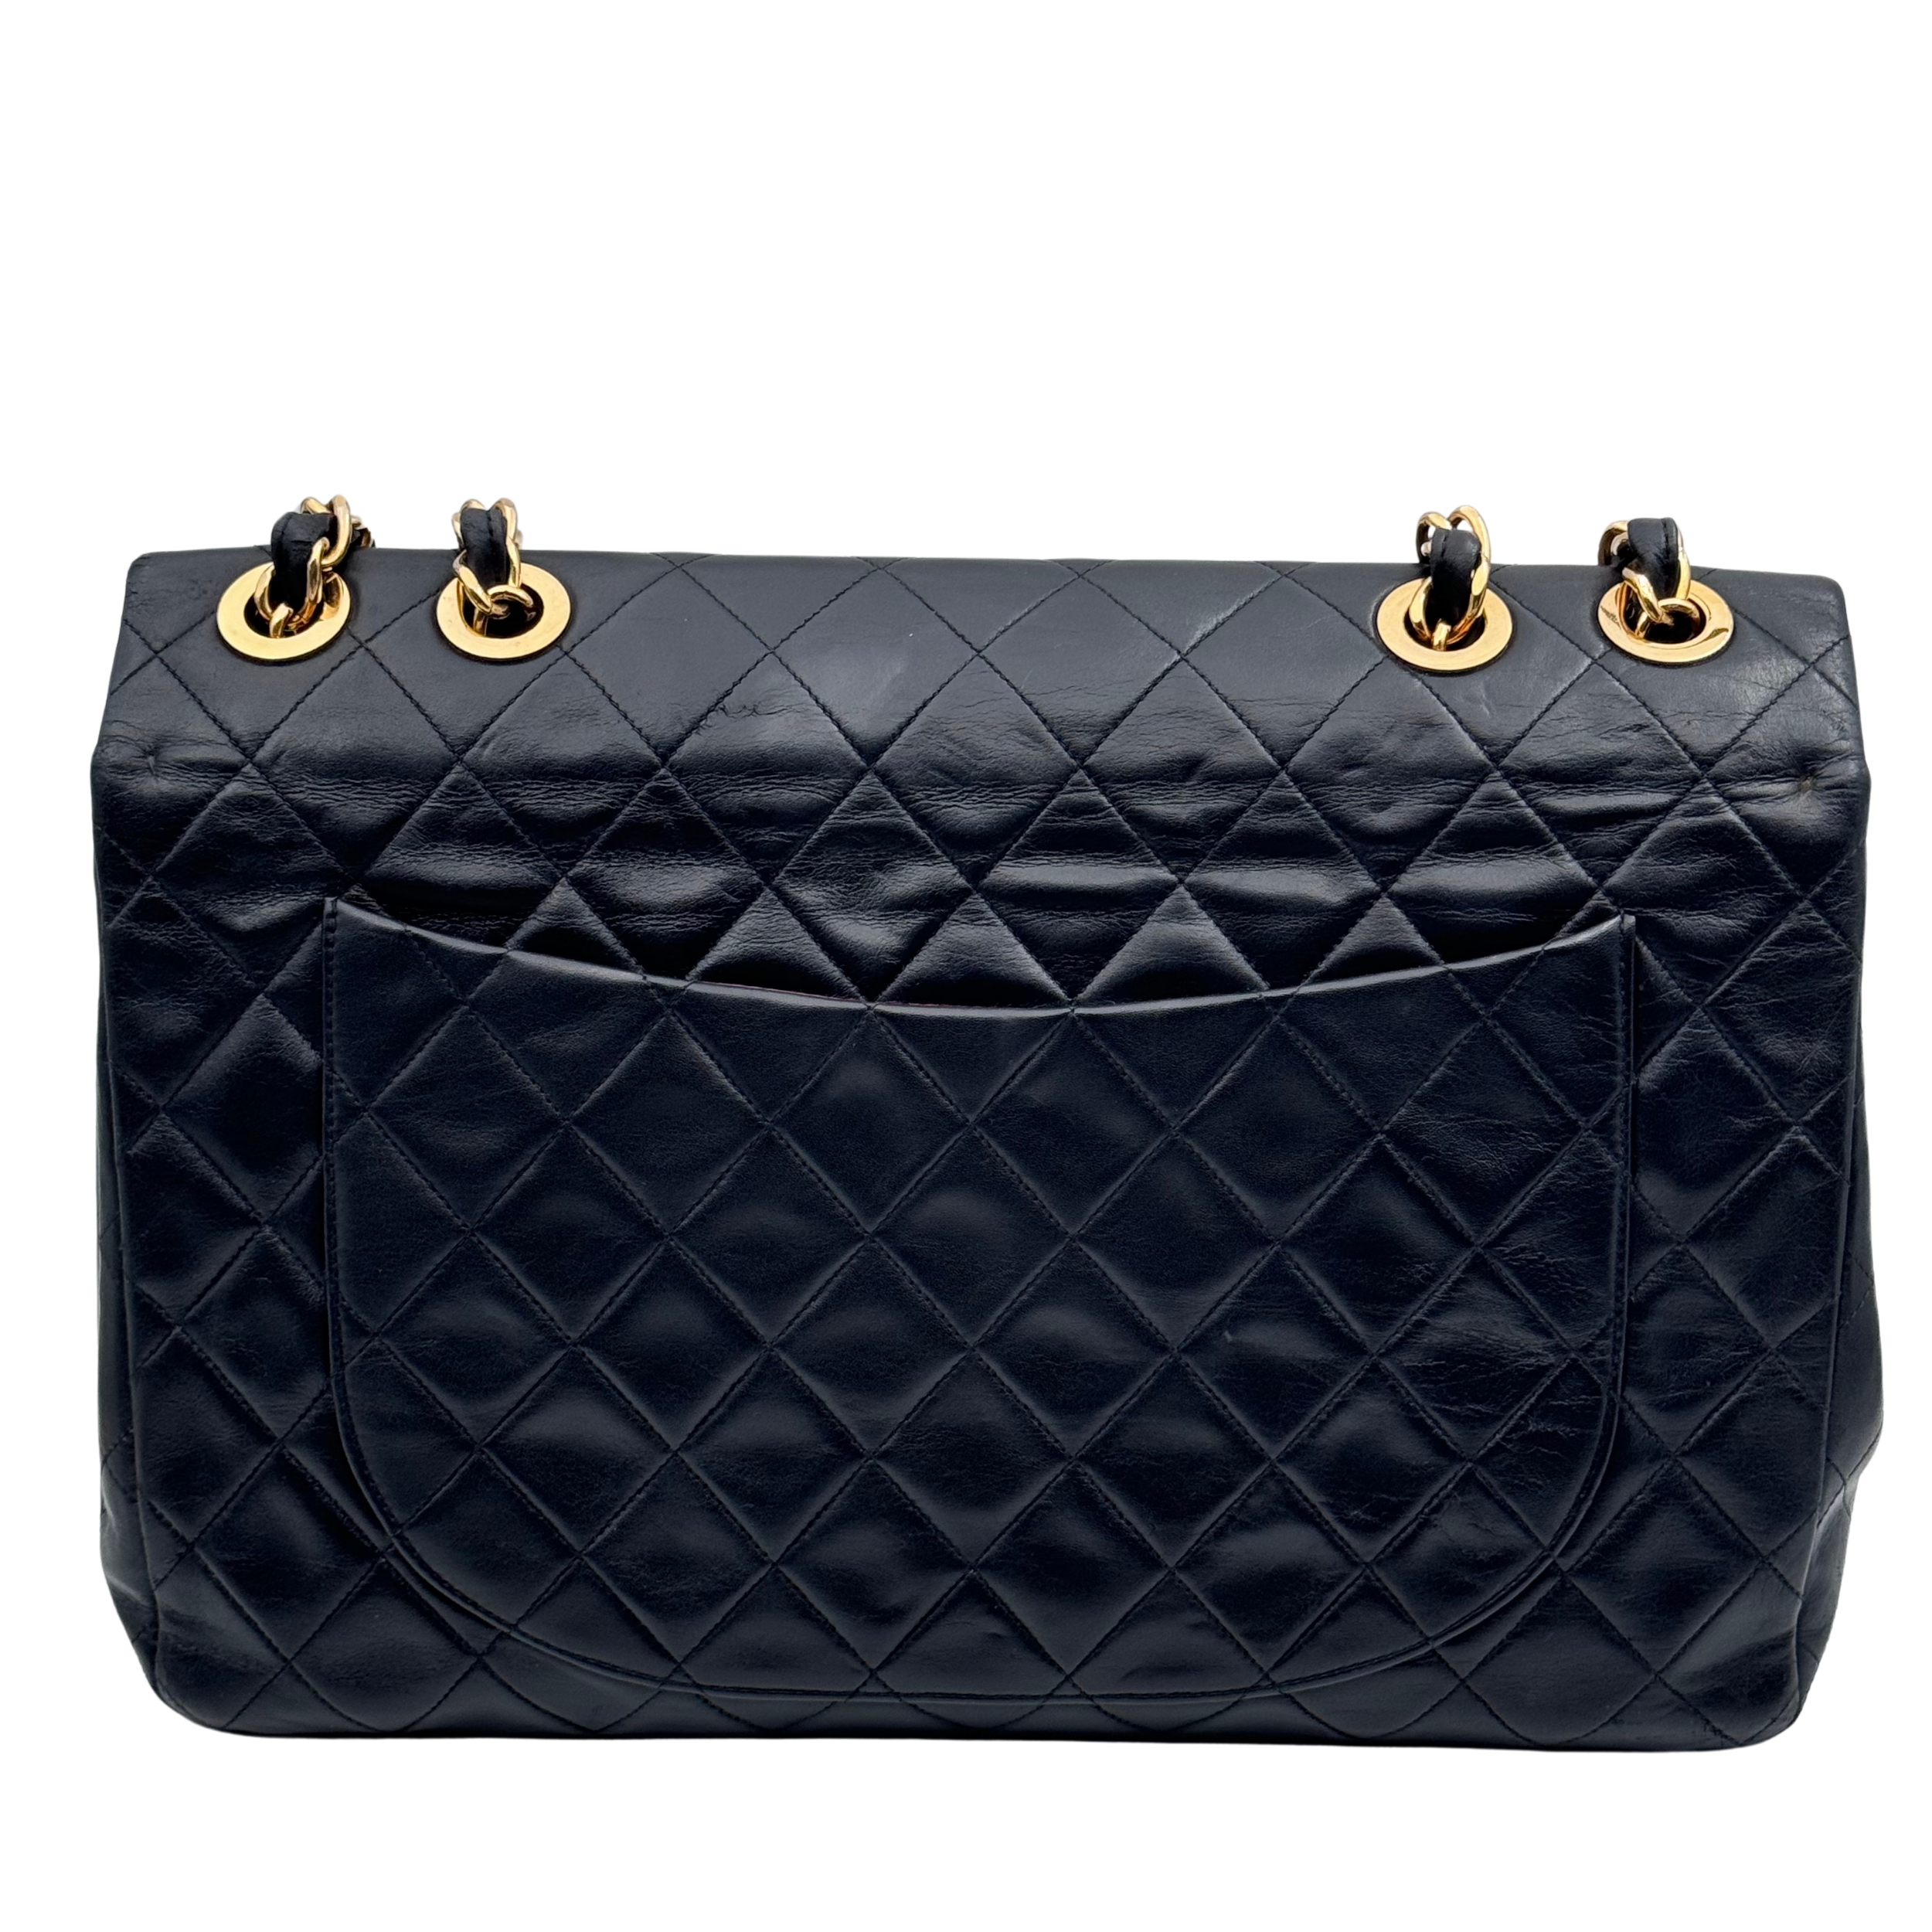 classic timeless maxi - chanel Lola Collective